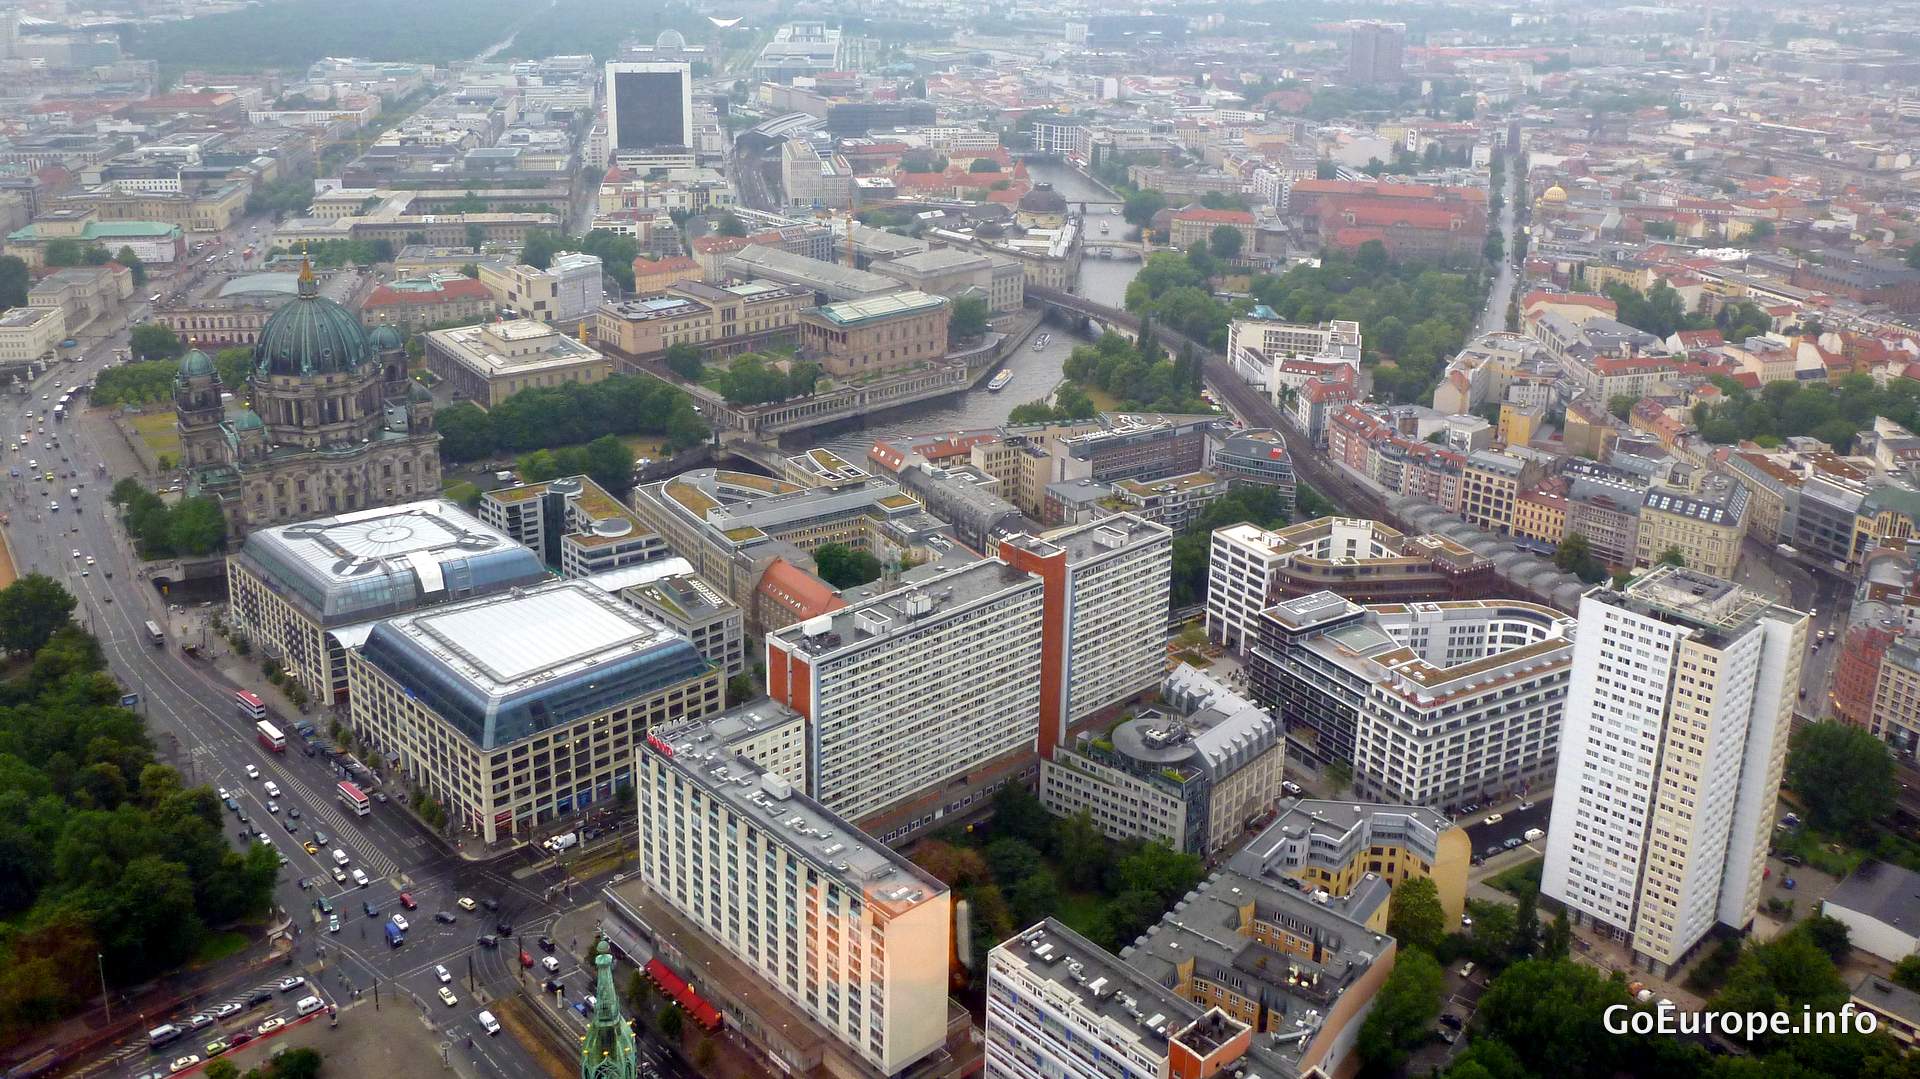 View from Fernsehturm, the TV-tower of Berlin.